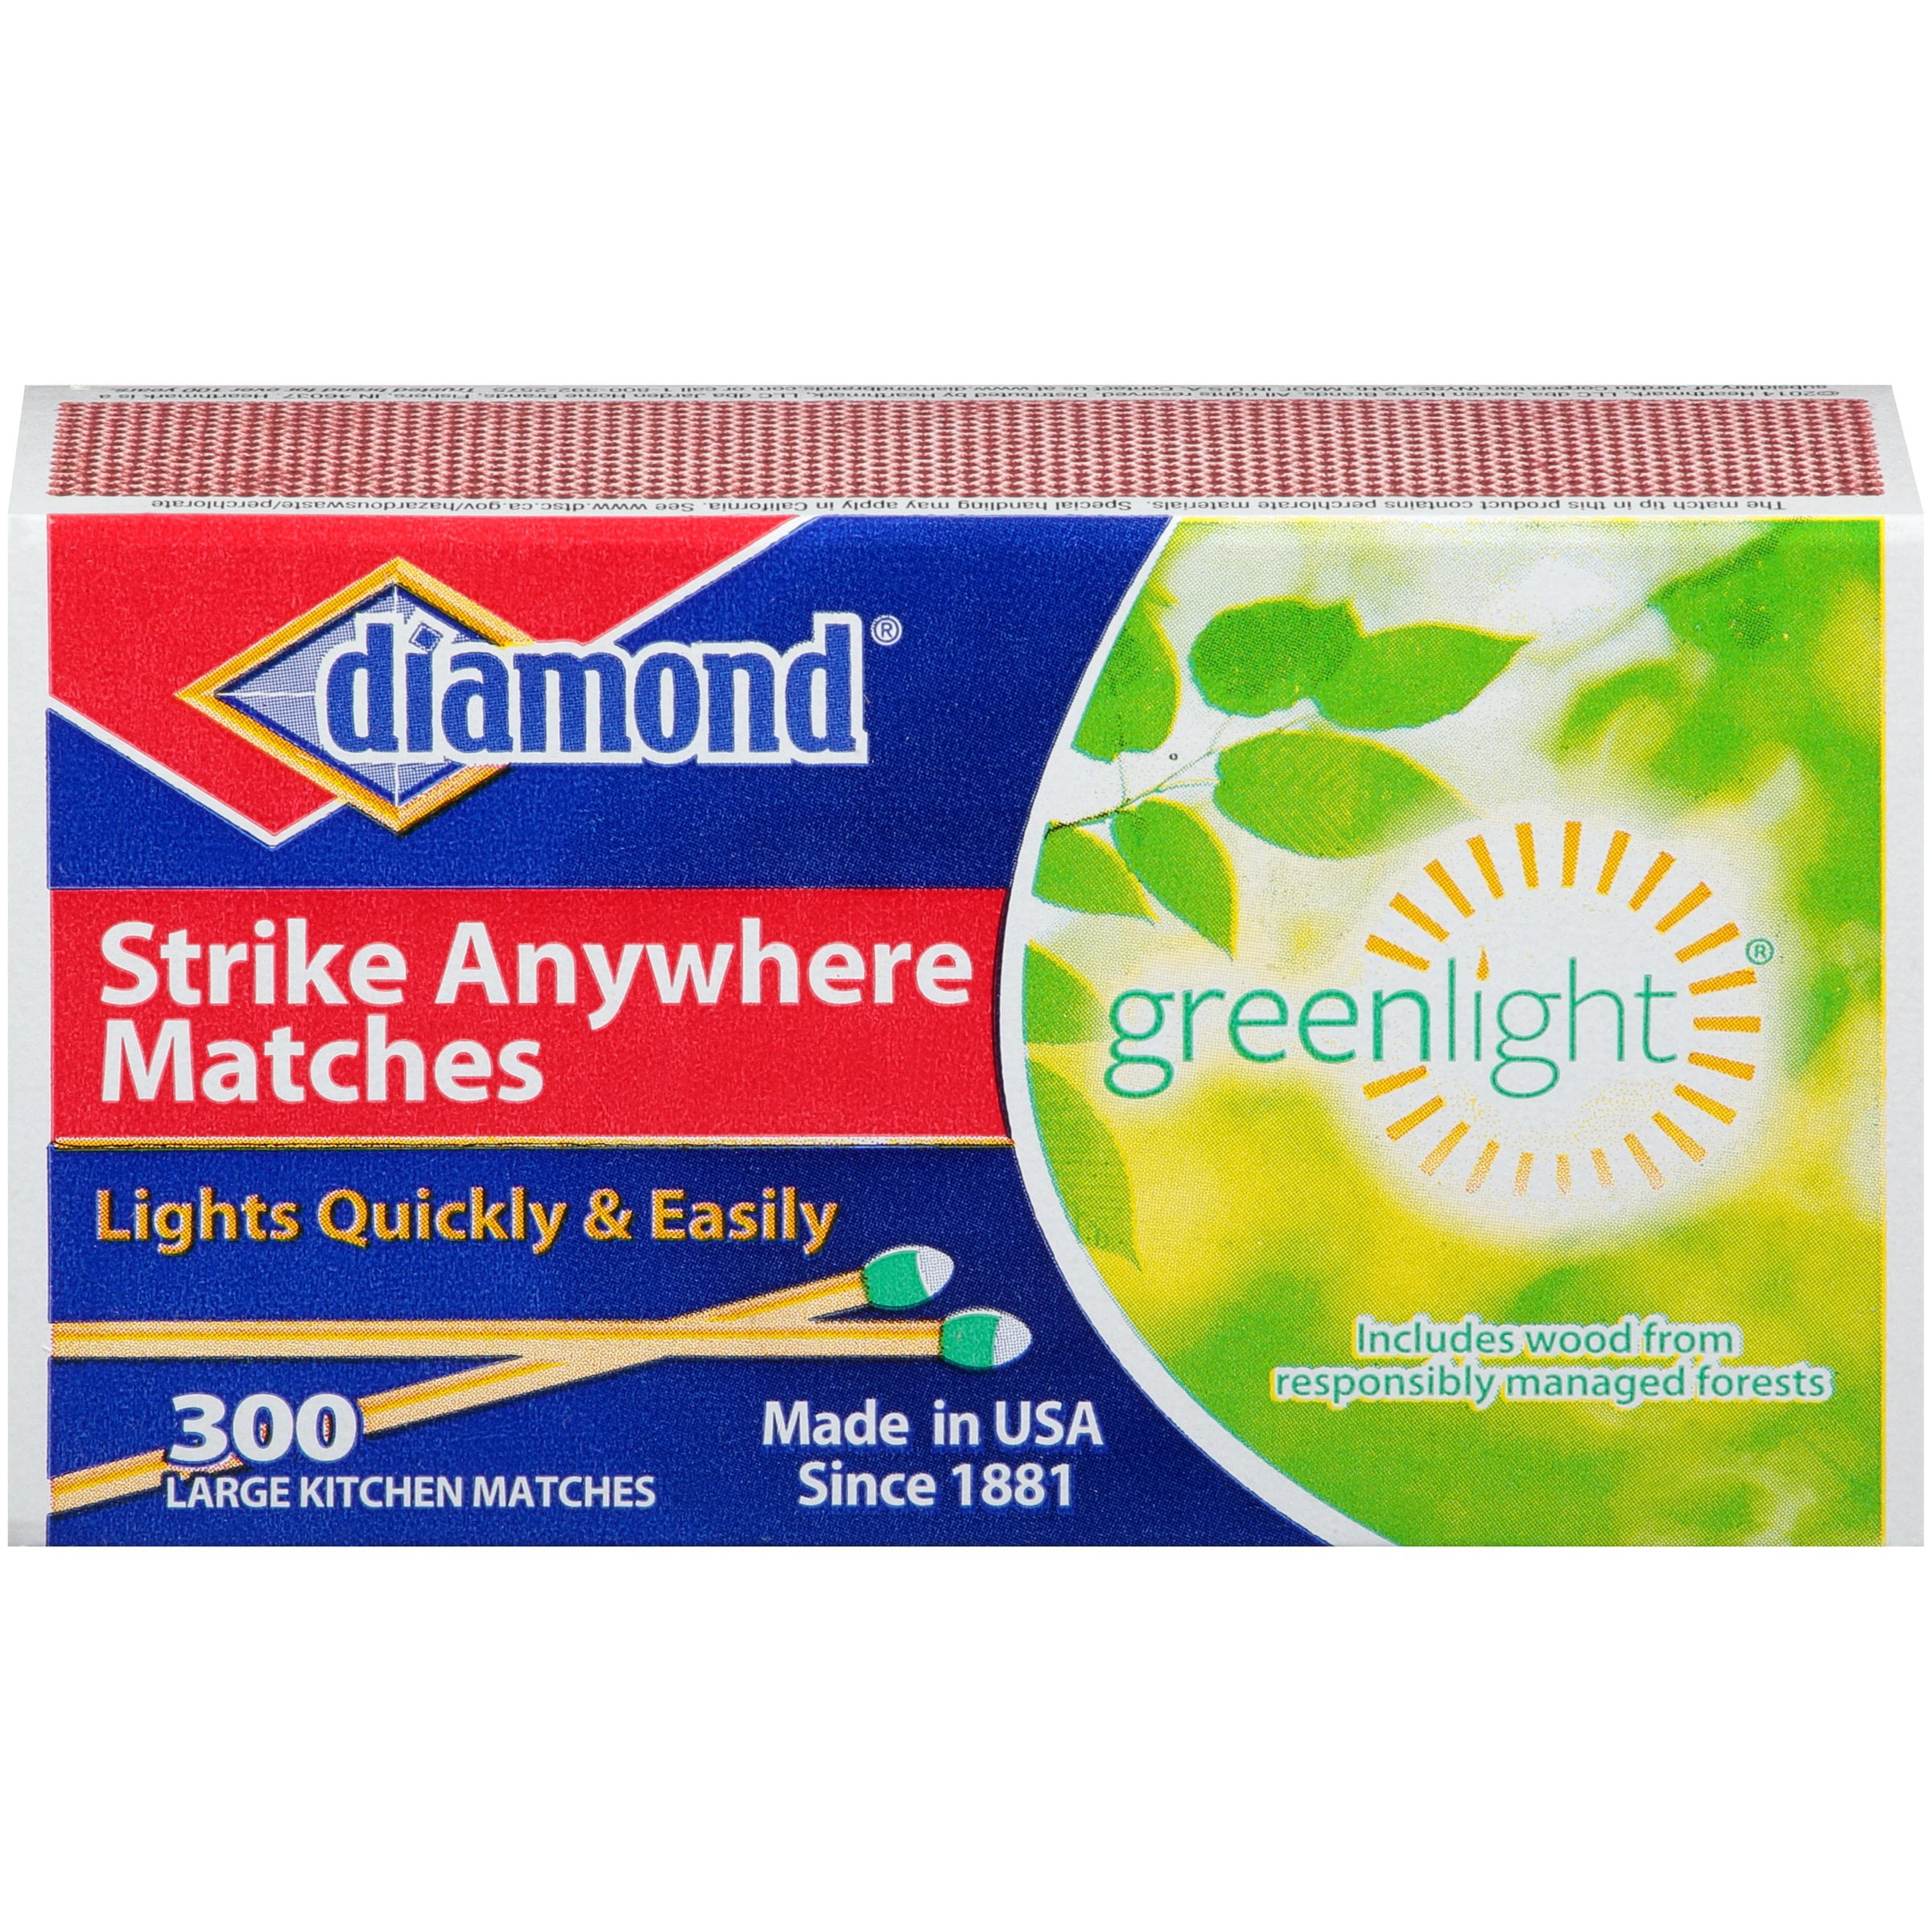 32 Count each box Pack of 10. GreenLight Diamond Strike on Box Matches